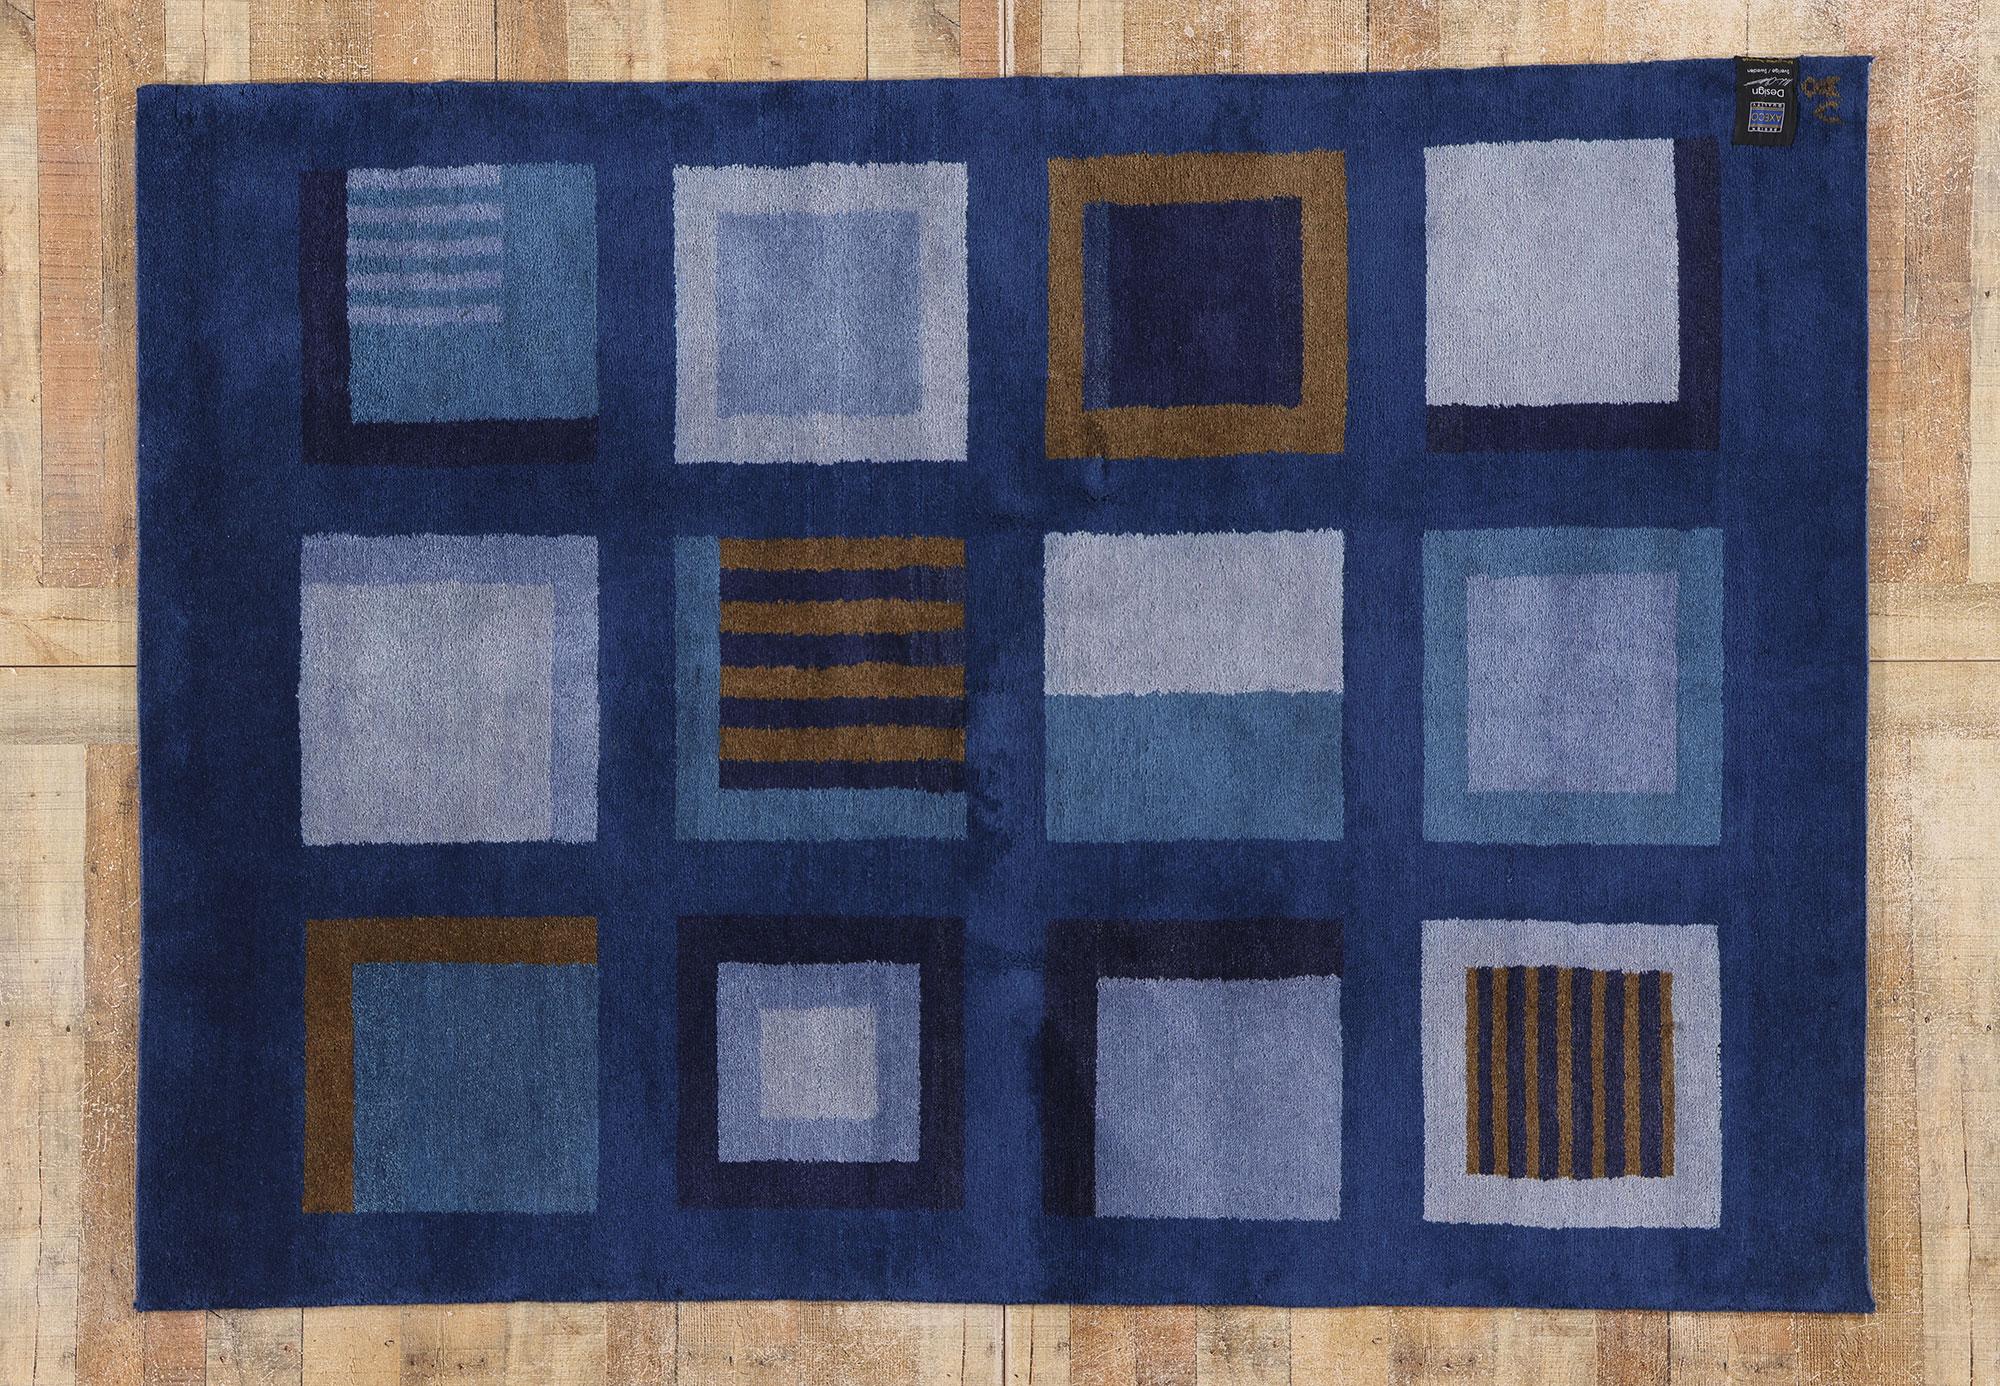 78735 Vintage Blue Swedish Pile Rug, 05'05 x 07'06. Scandinavian Modern meets bold cubism in this hand knotted wool vintage blue Swedish rug, creating a visually striking fusion of geometric abstraction and minimalist design elements with historical